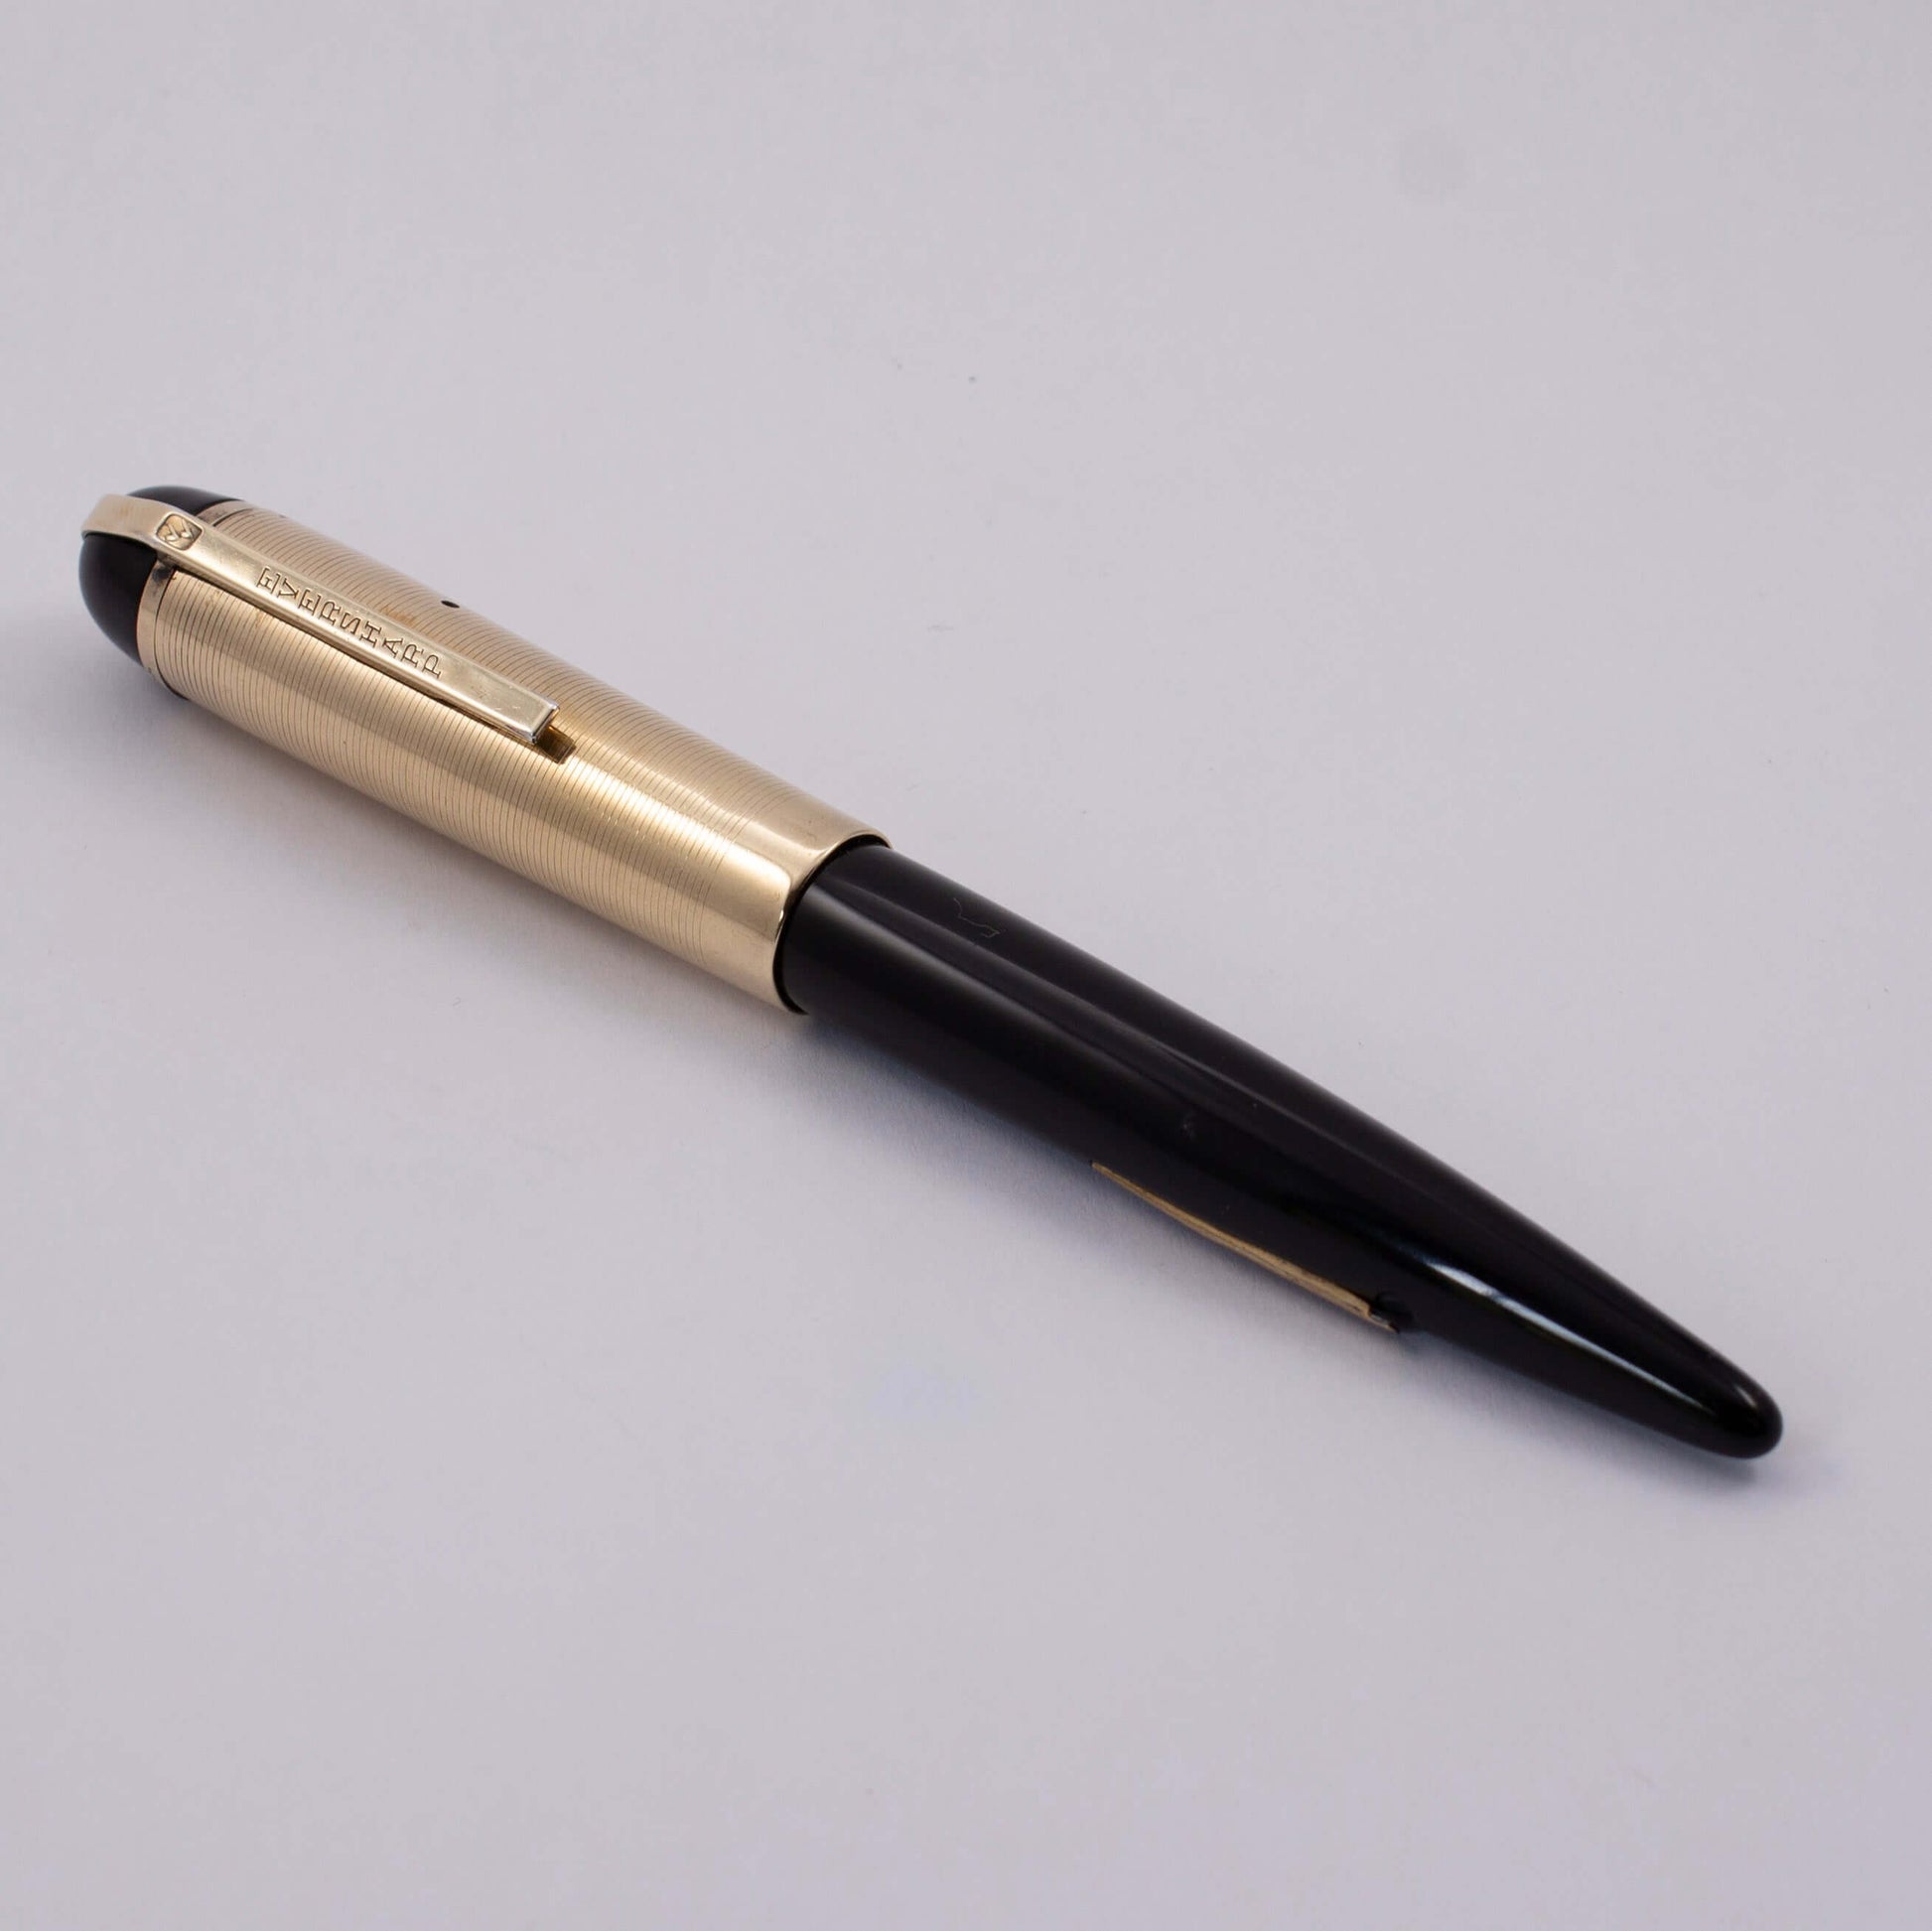 Eversharp Skyline Fountain Pen, Black Barrel and Derby, Gold Filled Lined Cap. Gold Filled Trim, Extra Fine 14k Nib Type: Restored Lever Filling Fountain Pen Product Name: Eversharp Skyline Manufacture Year: 1940's Length: 5 1/4 Filling System: Lever Fill